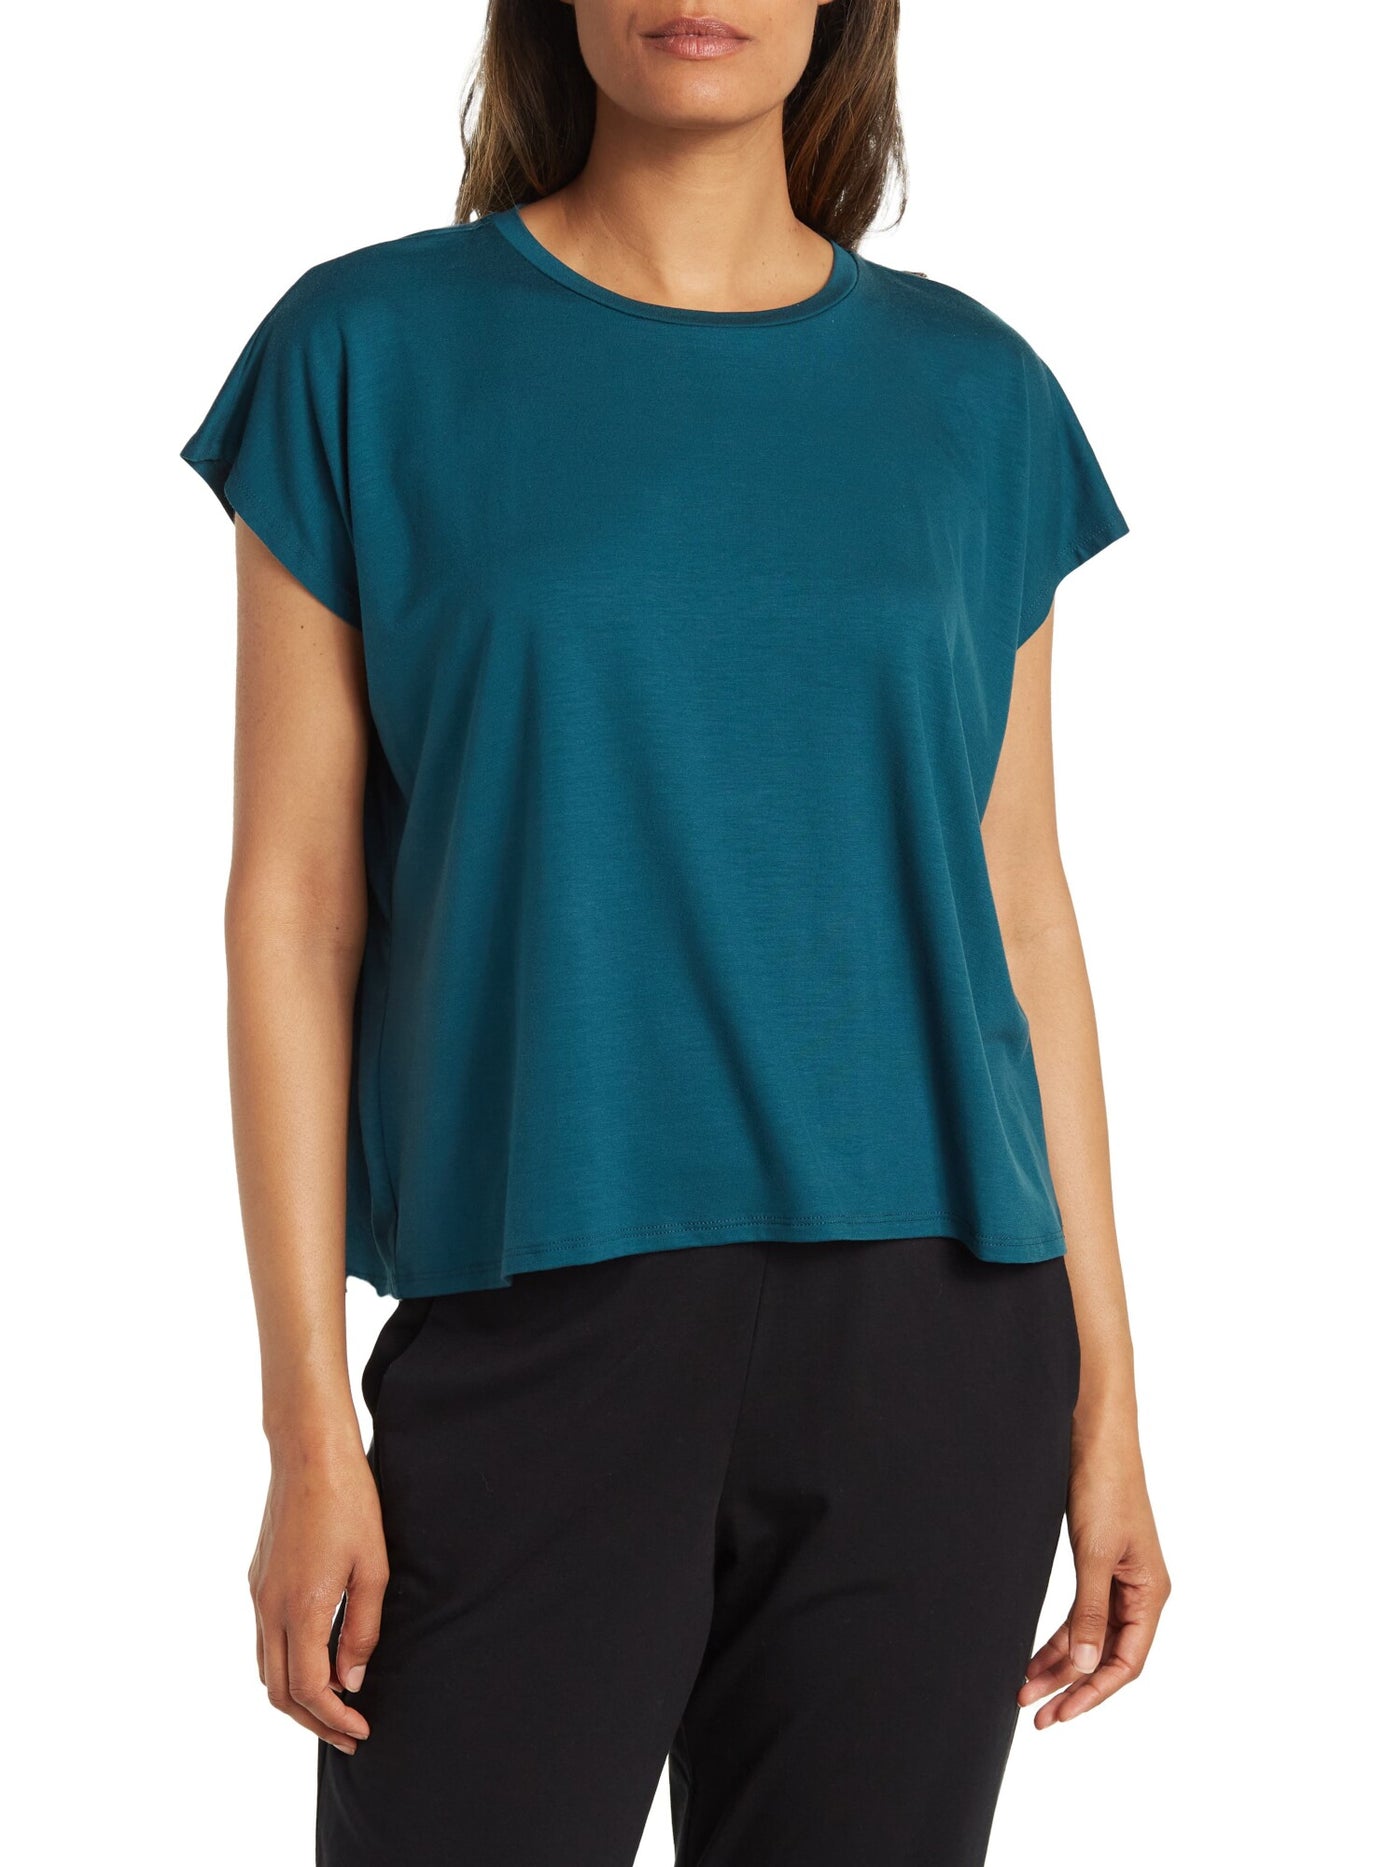 EILEEN FISHER Womens Teal Stretch Cap Sleeve Crew Neck Top L